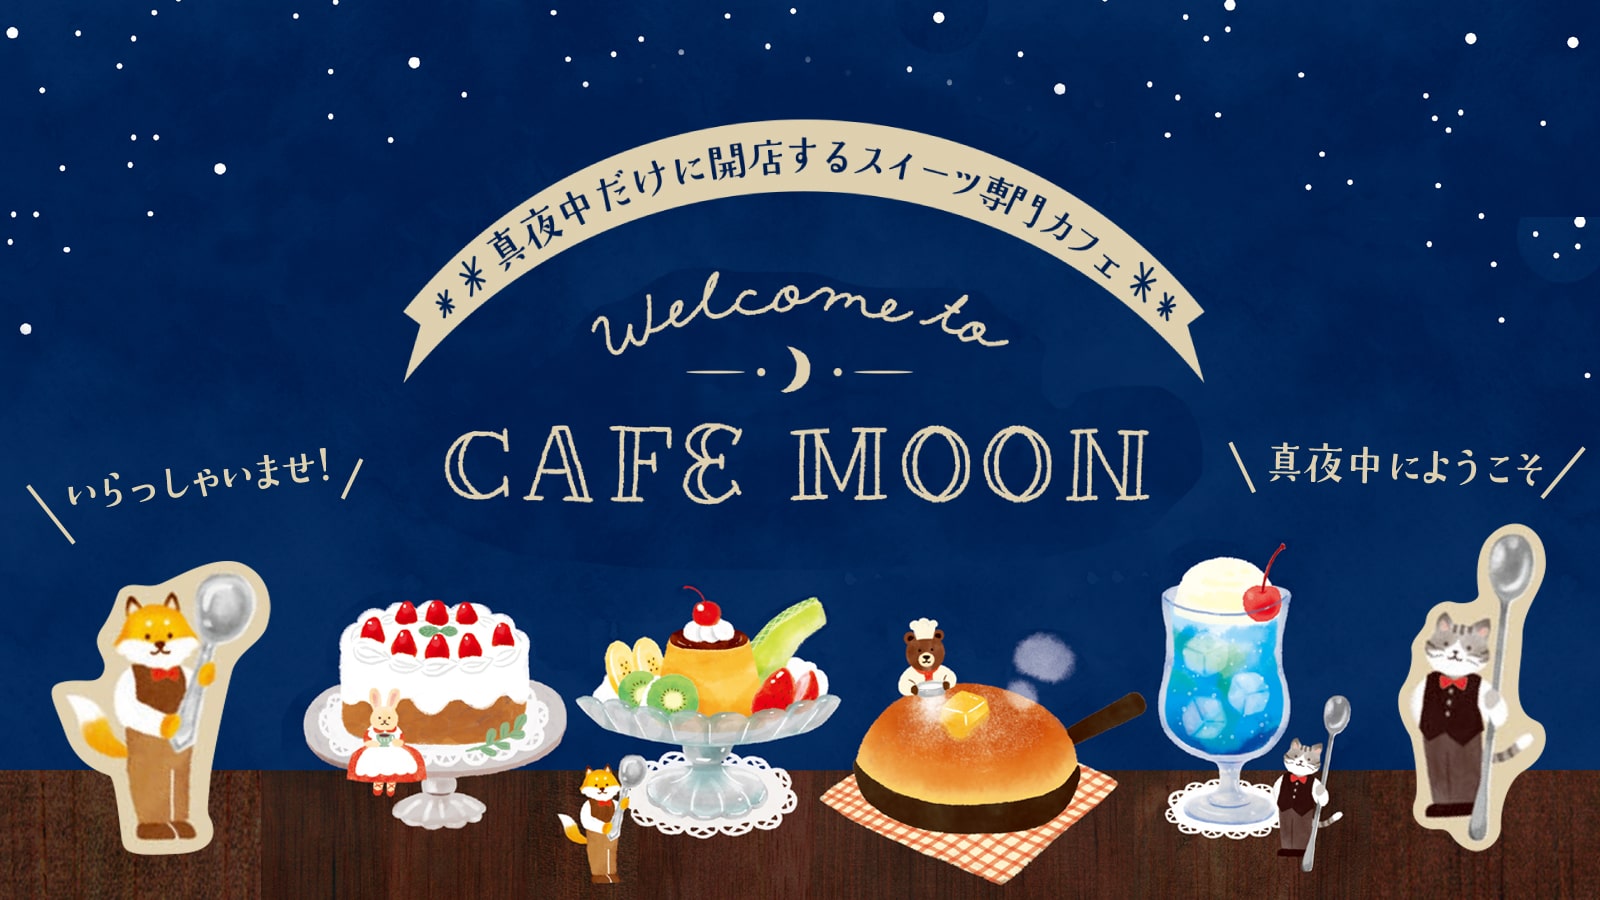 CAFE MOONシリーズ商品のご案内